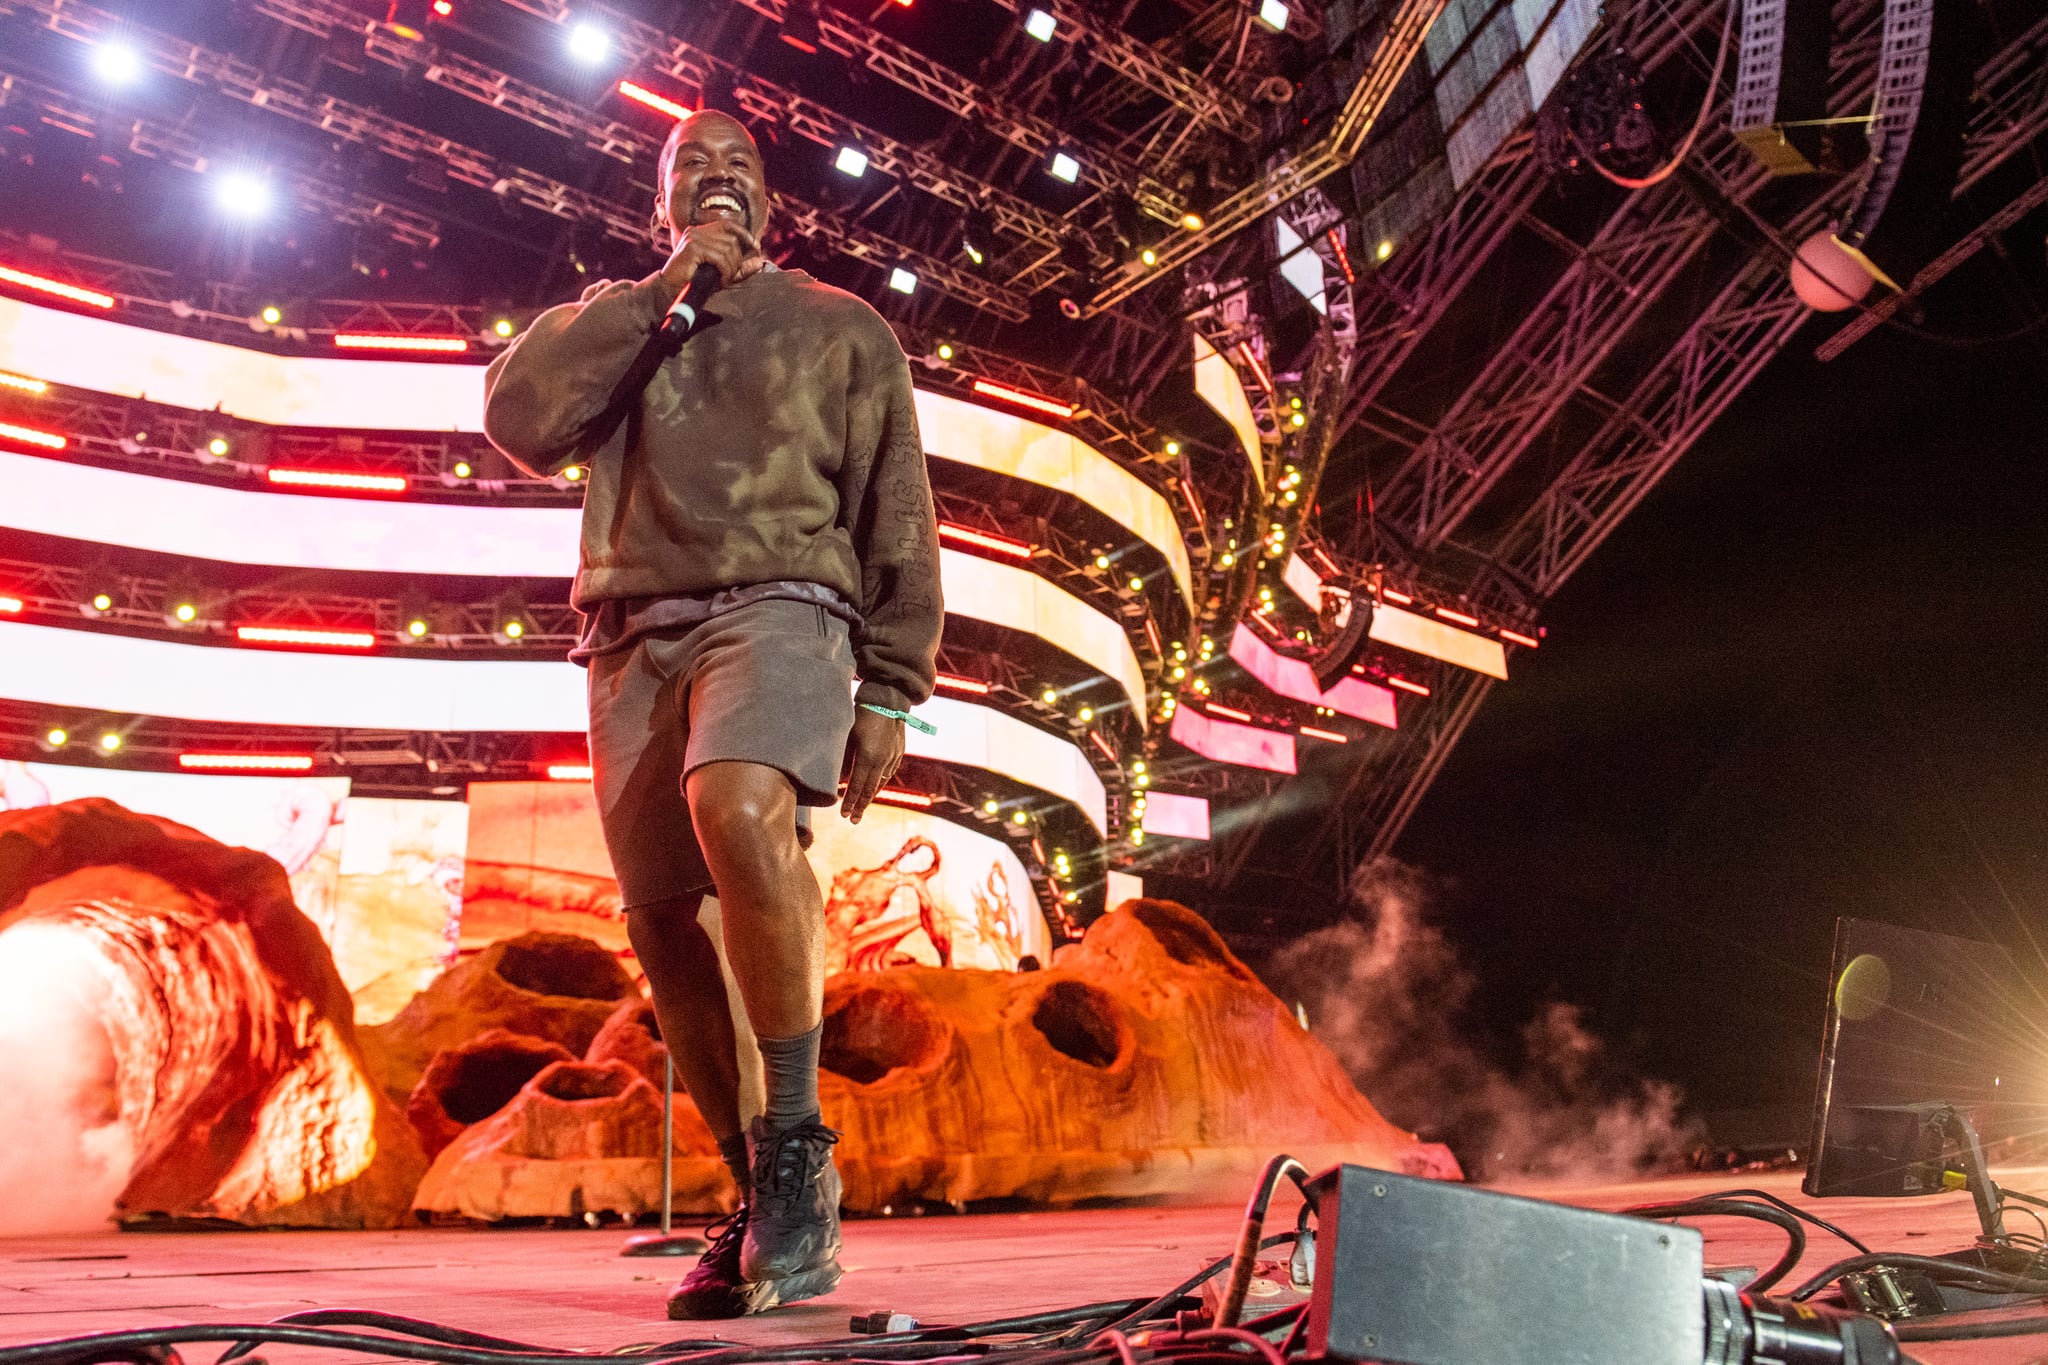 INDIO, CALIFORNIA - APRIL 20: Kanye West performs during 2019 Coachella Valley Music And Arts Festival on April 20, 2019 in Indio, California. (Photo by Timothy Norris/Getty Images for Coachella)